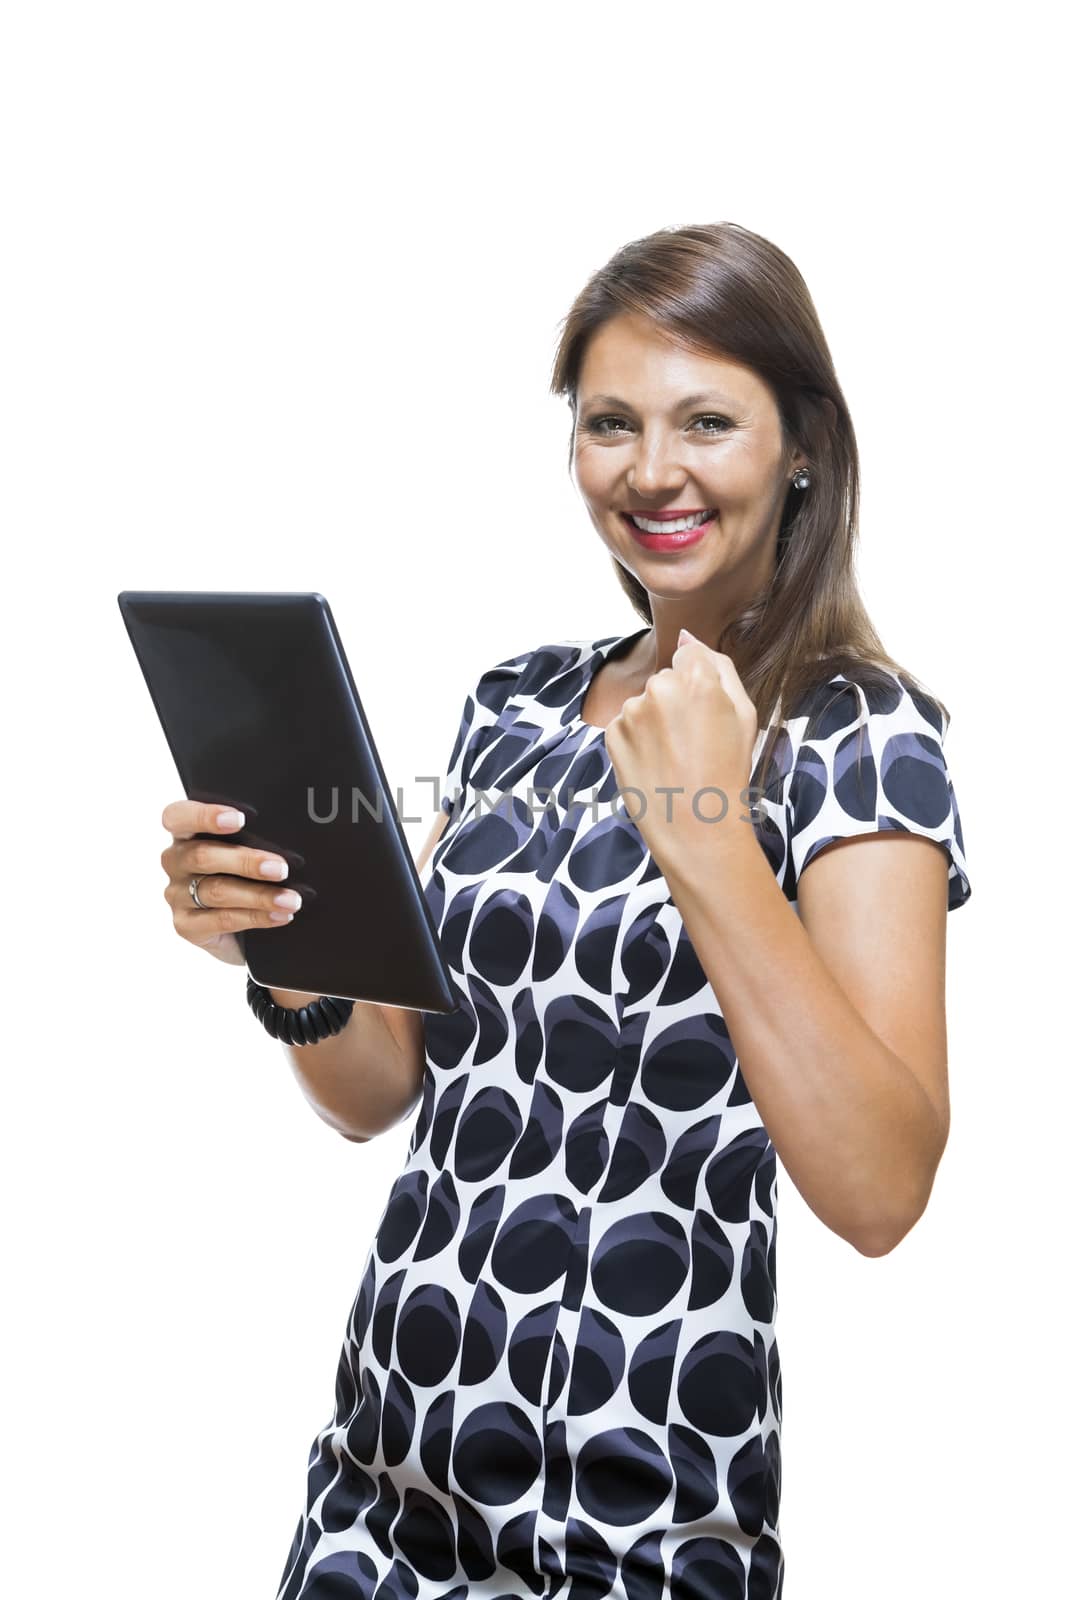 Portrait of a Smiling Lady in an Elegant Printed Dress Holding a Tablet Computer with Copy Space While Looking at the Camera. Isolated on White Background.